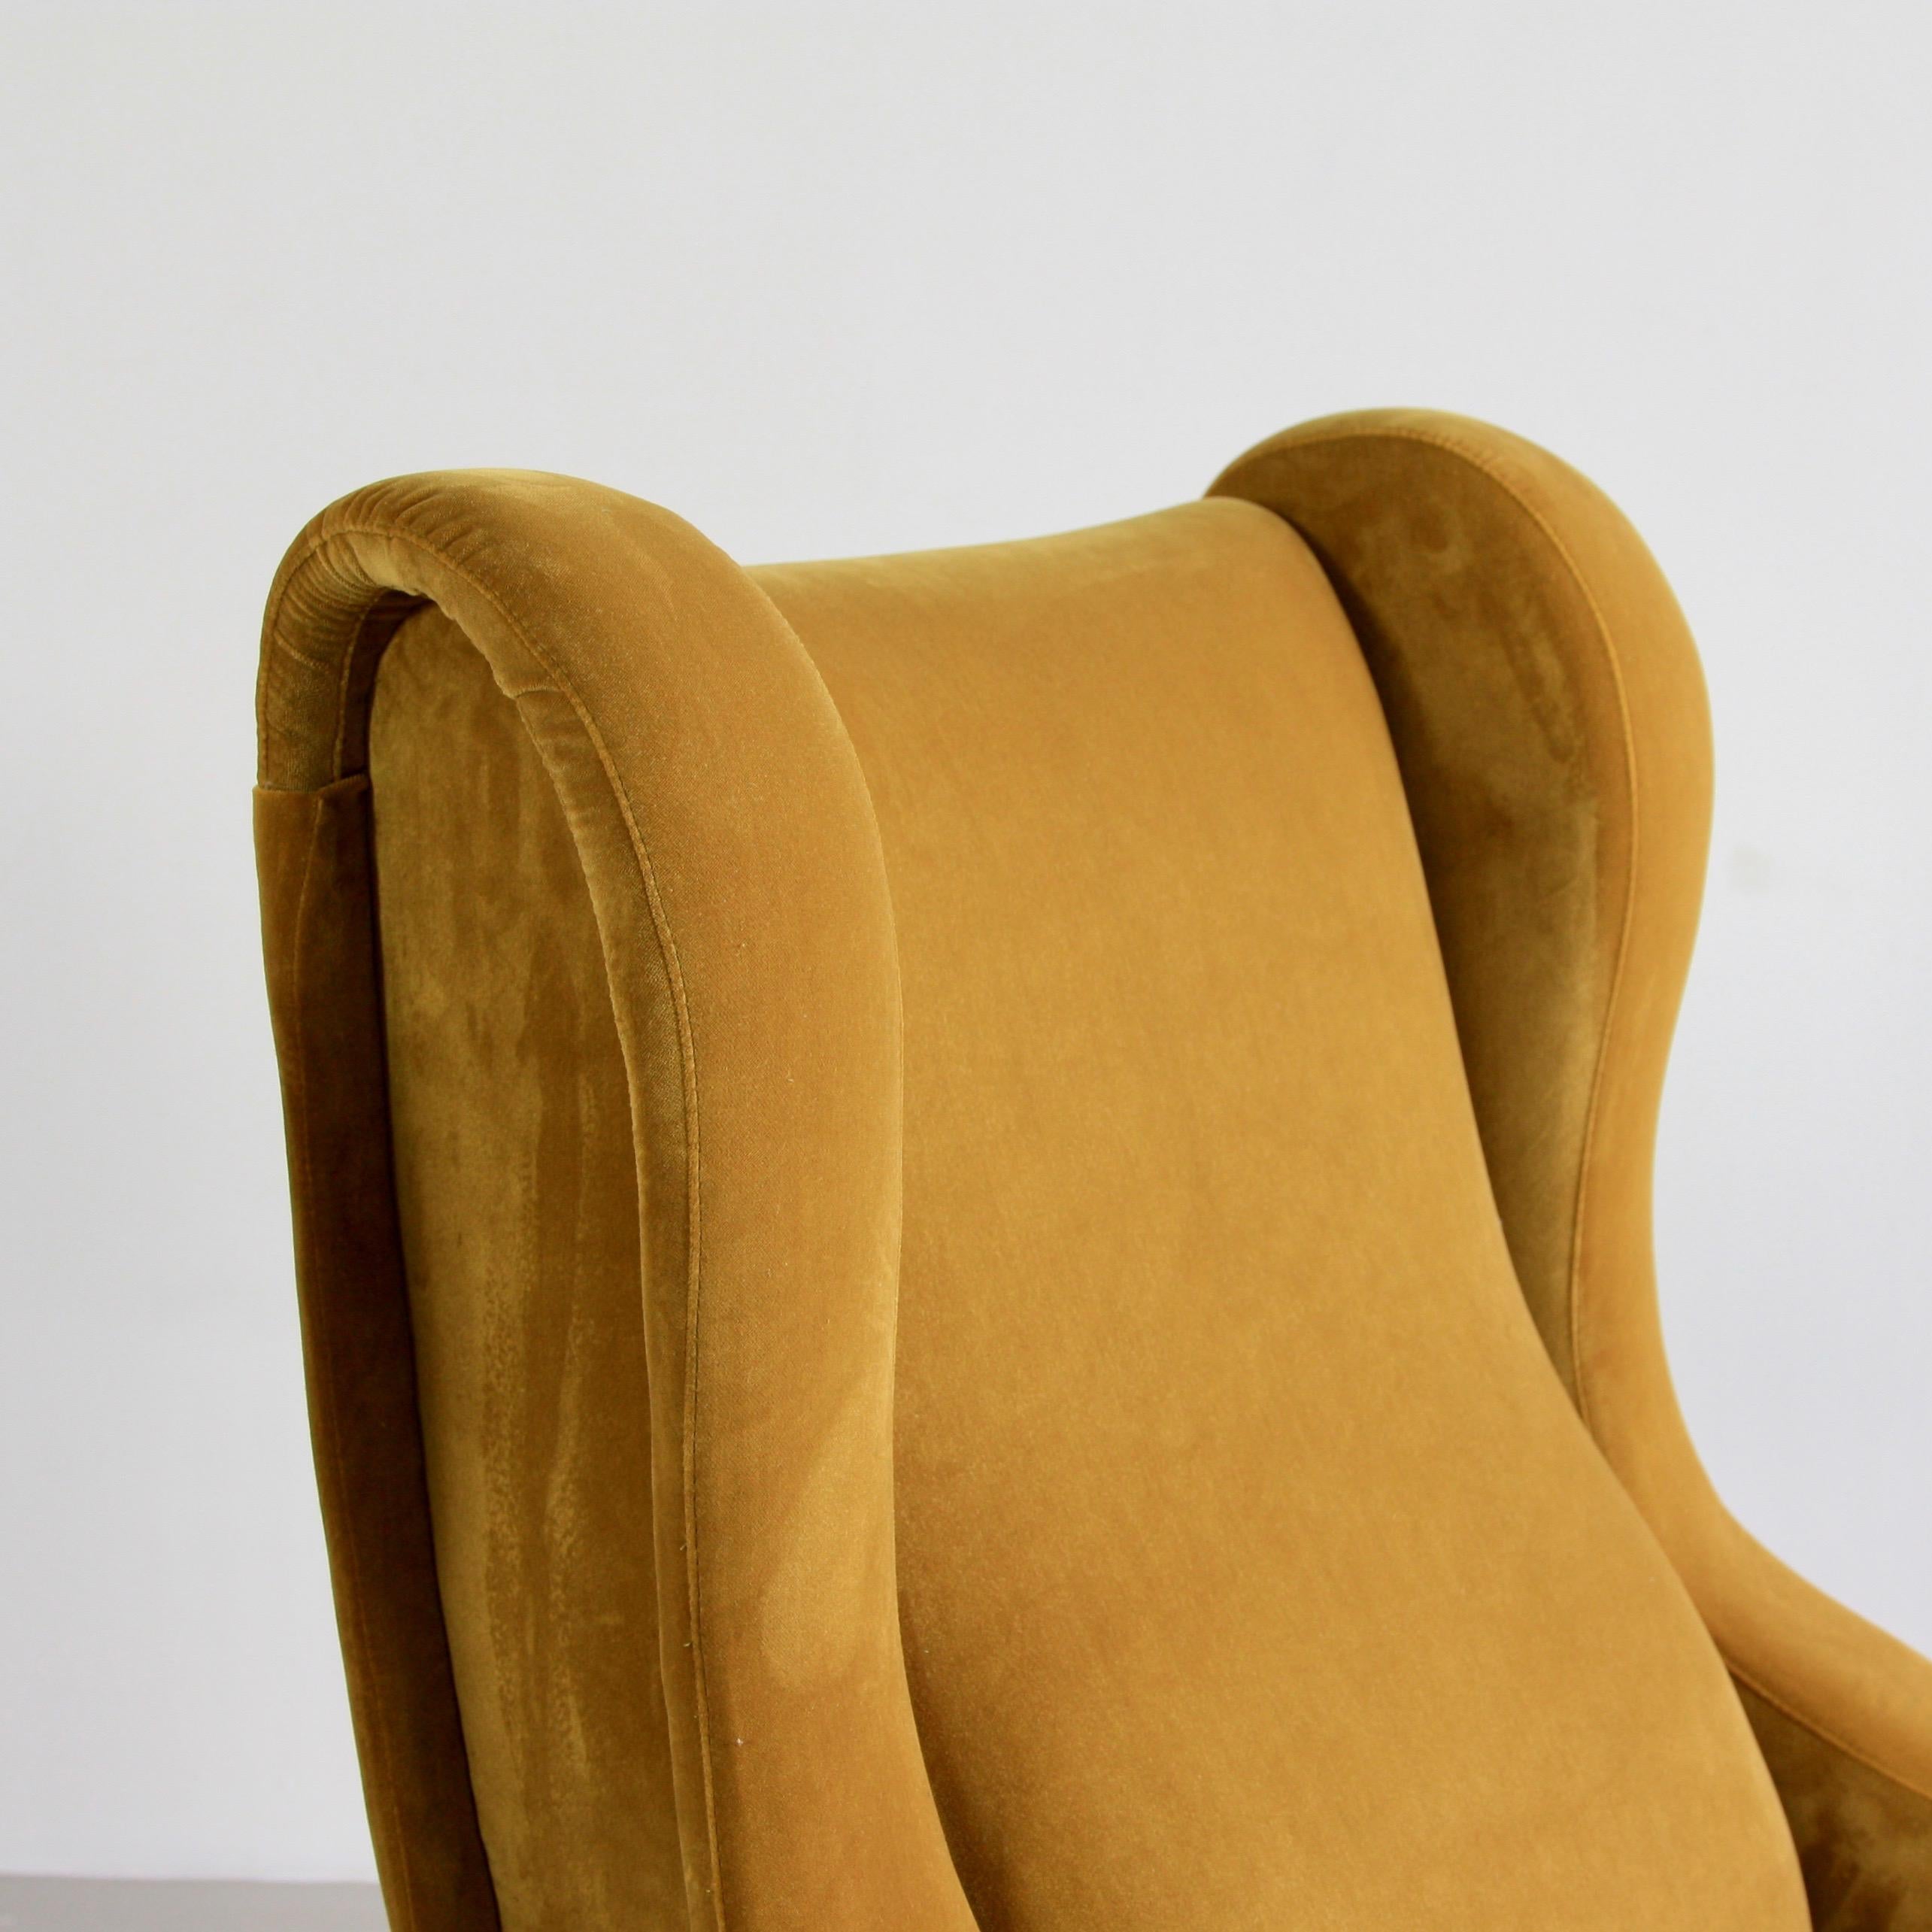 Pair of Senior chairs, designed by Marco Zanuso. Italy, Arflex, 1951.

An early original pair of lounge chairs 'Senior' newly restored and upholstered in mustard yellow coloured velvet material. Metal frame with brass legs fittings and wooden